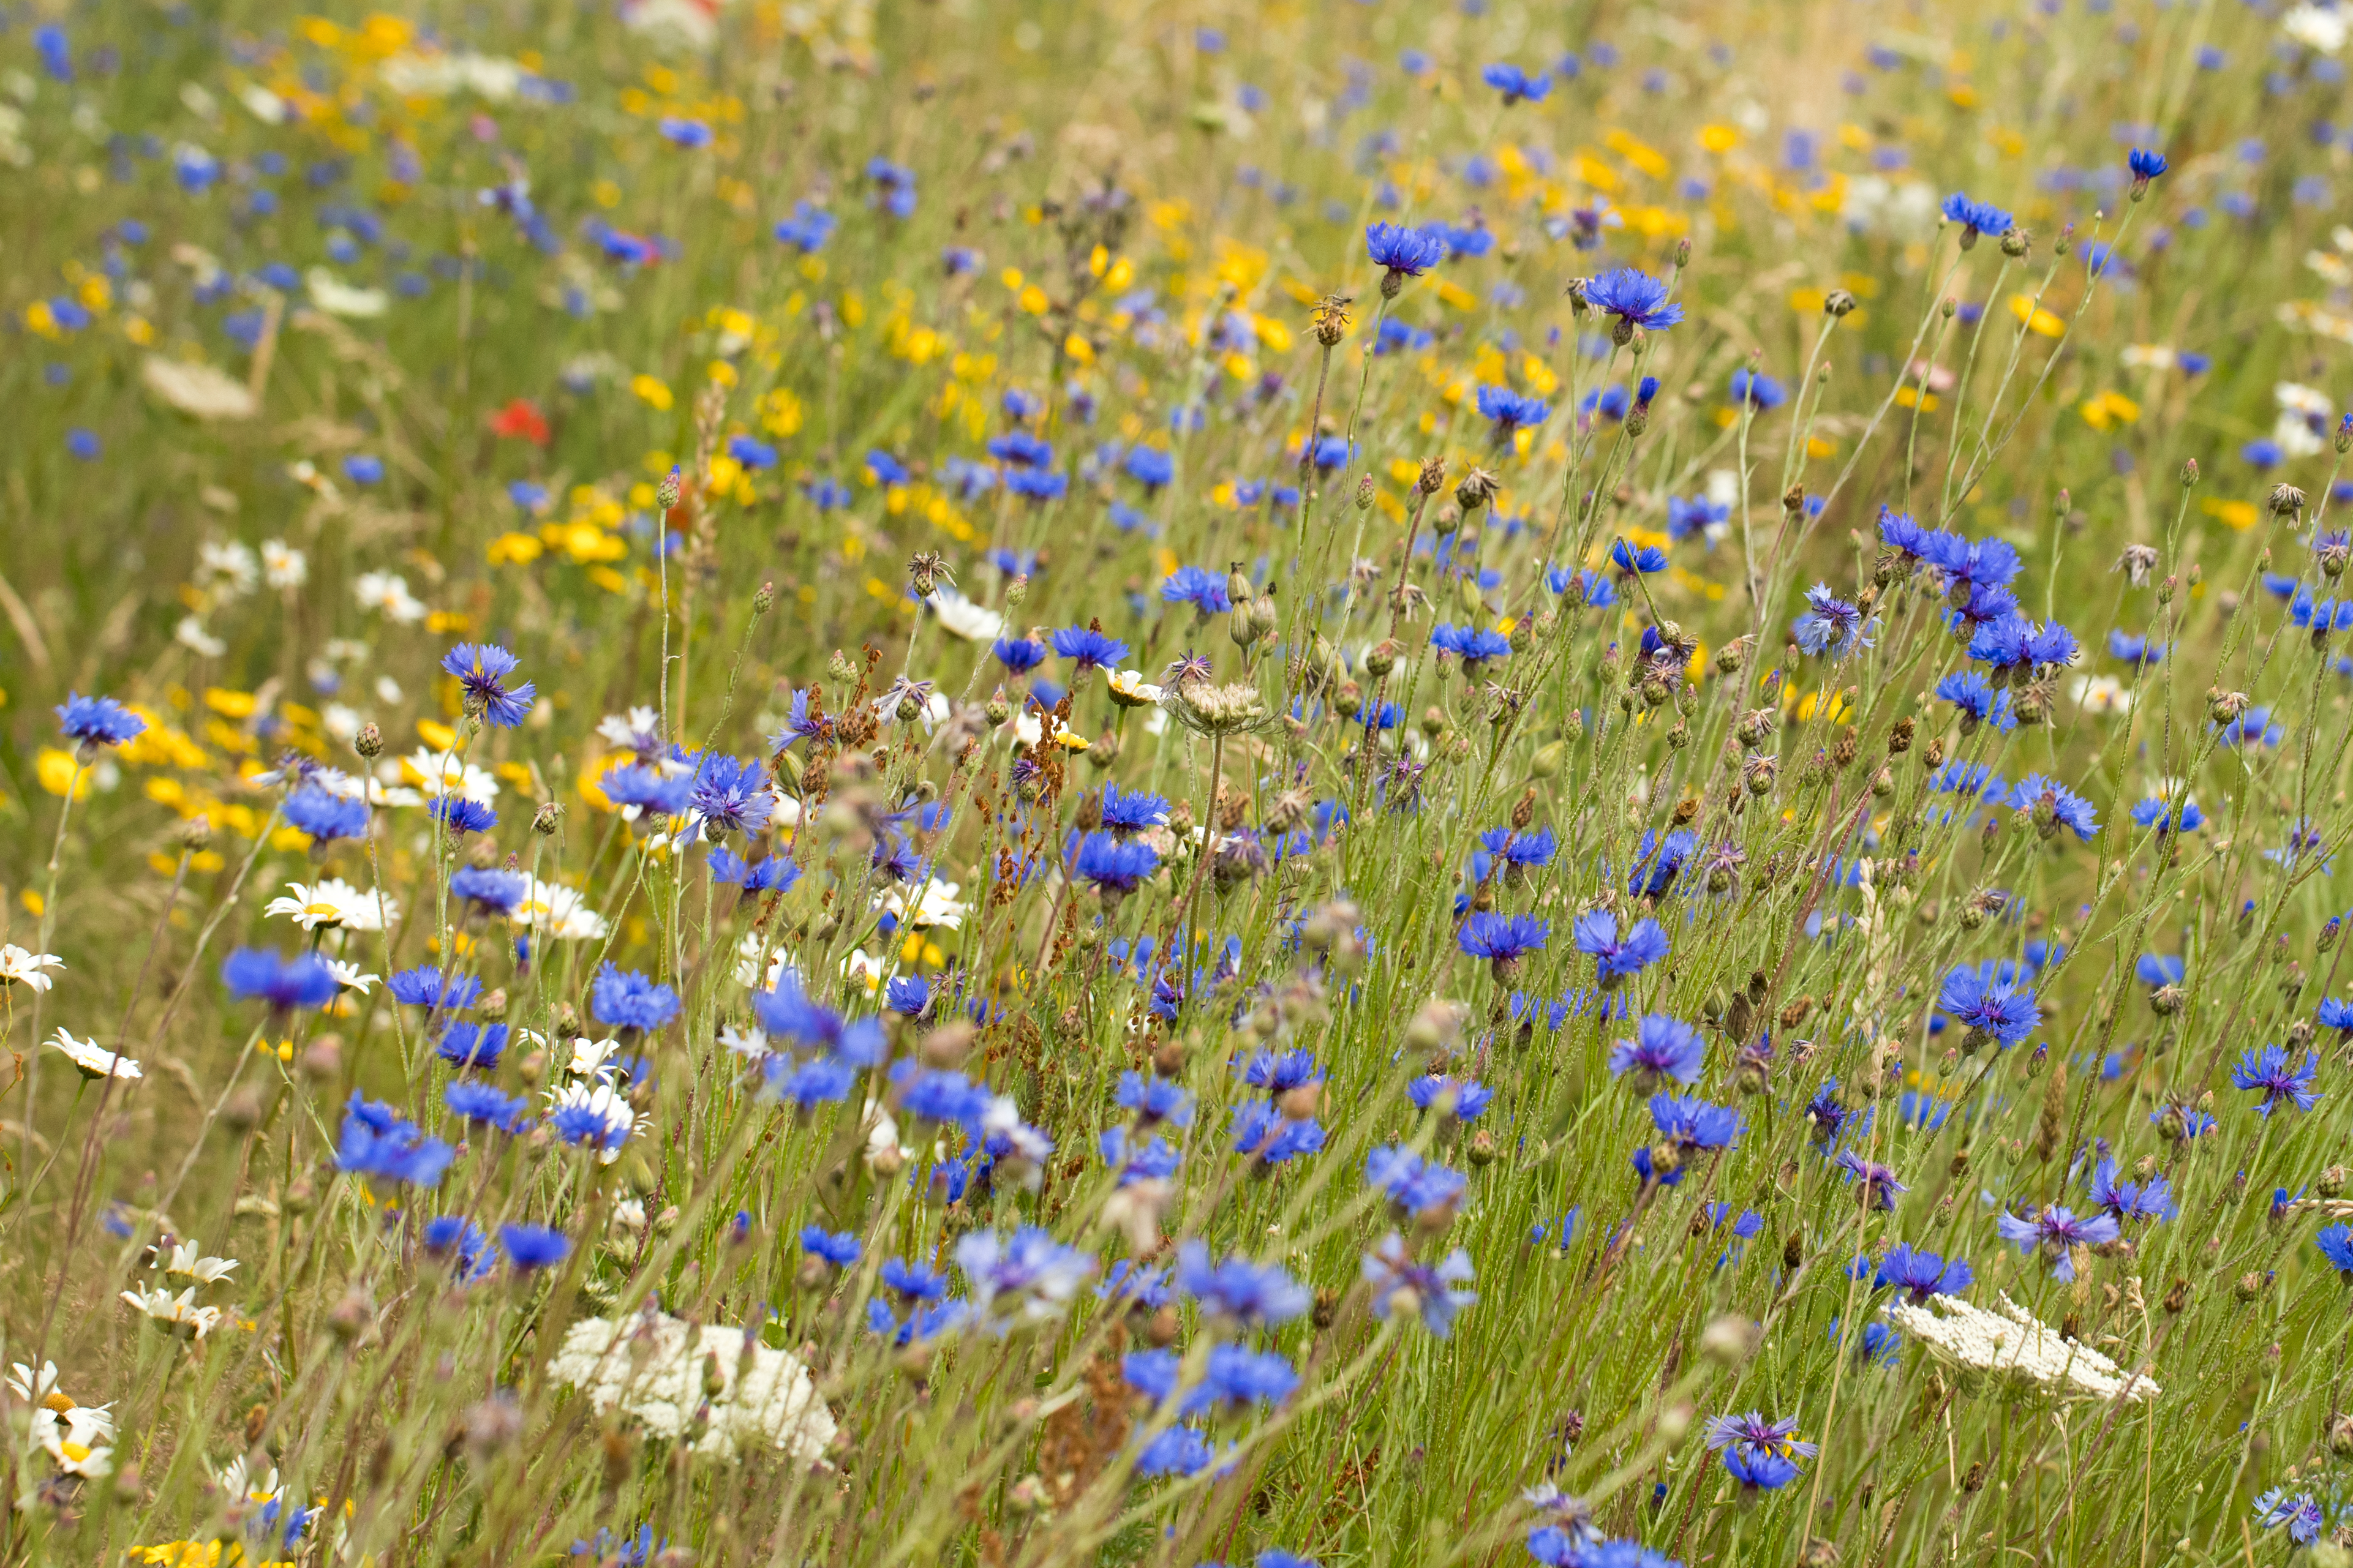 A view of wildflowers in the field 